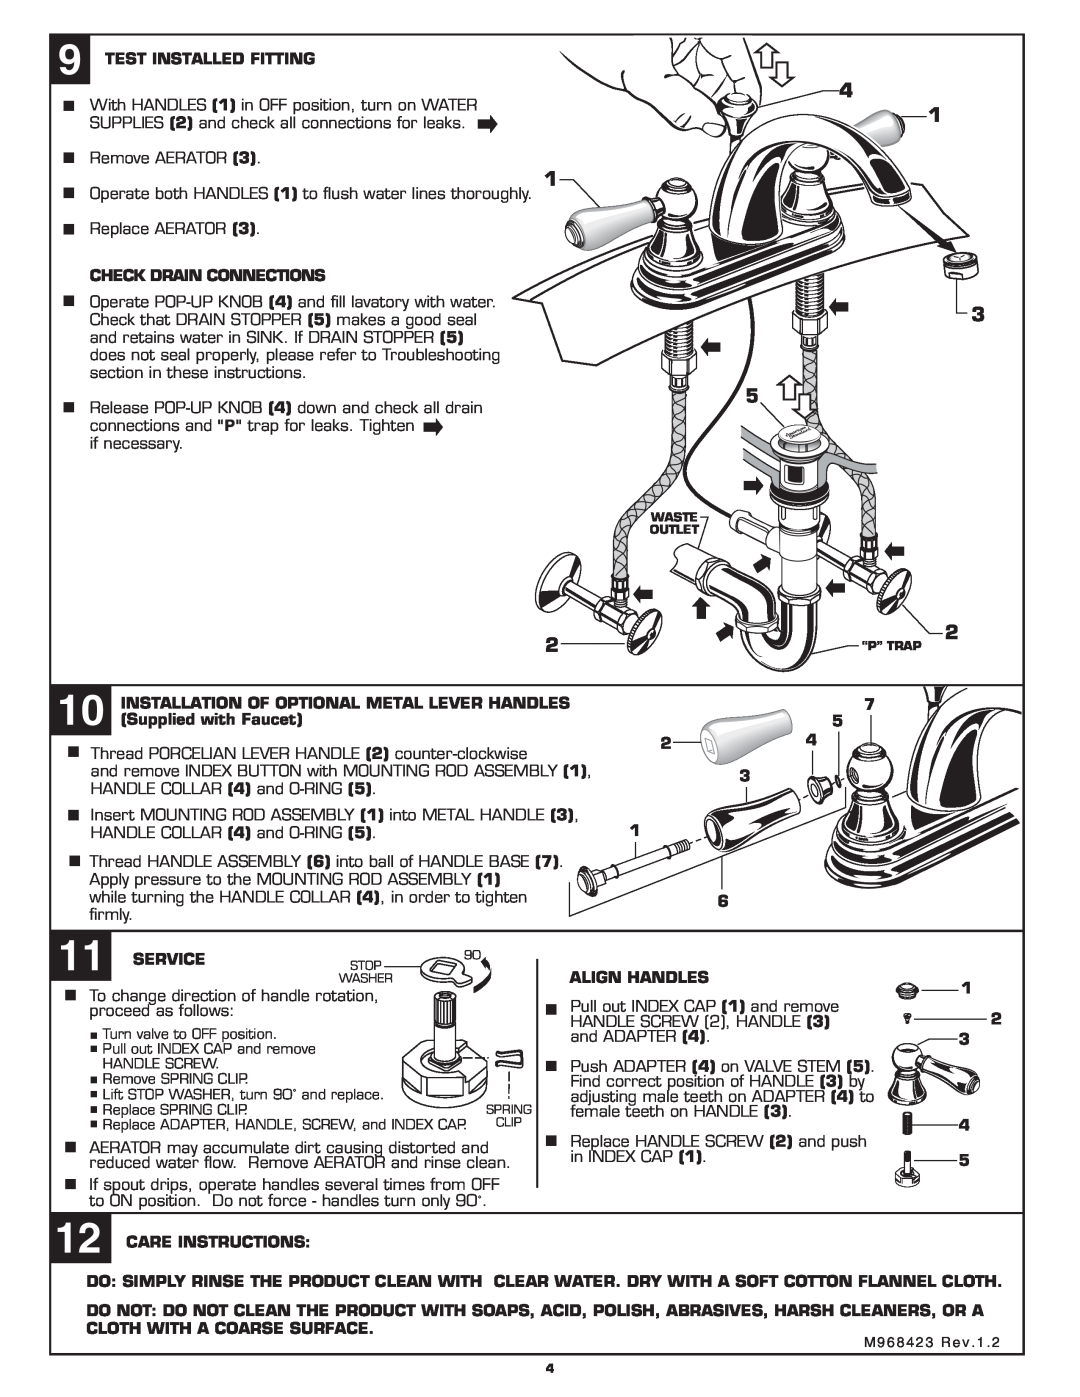 American Standard 2904 installation instructions Test Installed Fitting 